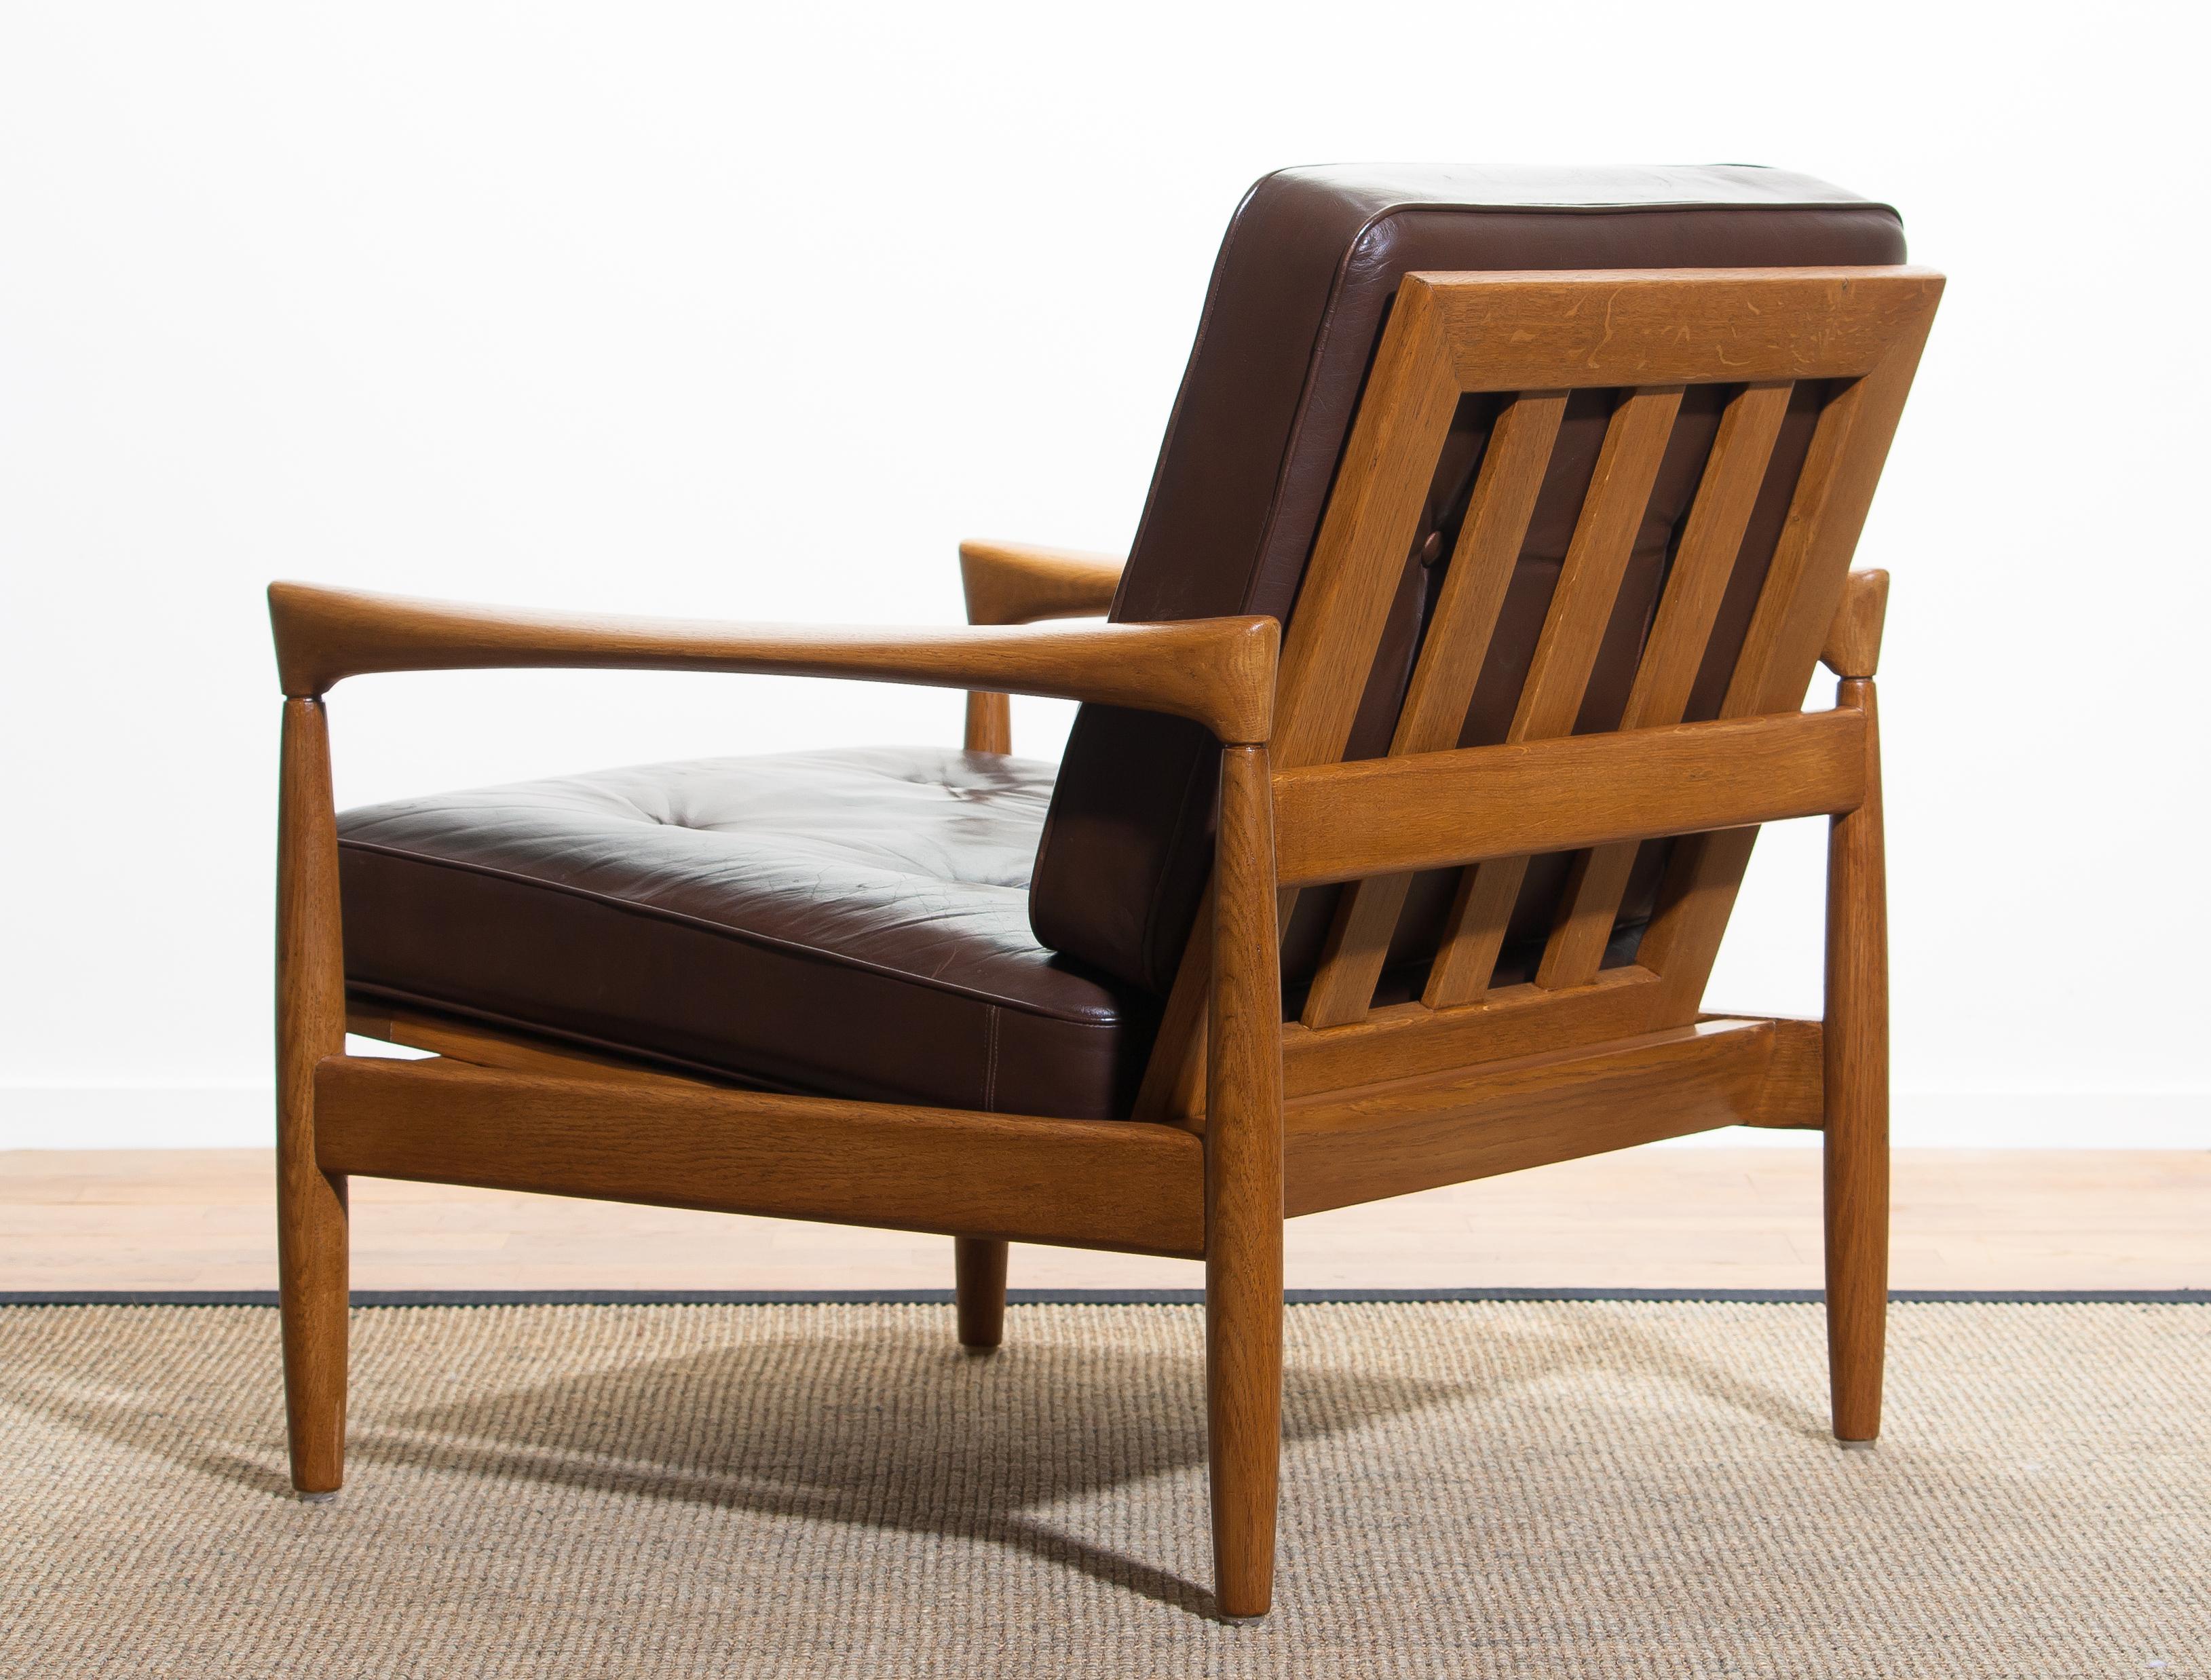 1960s, Oak and Brown Leather Lounge Chair by Erik Wörtz for Bröderna Anderssons 5